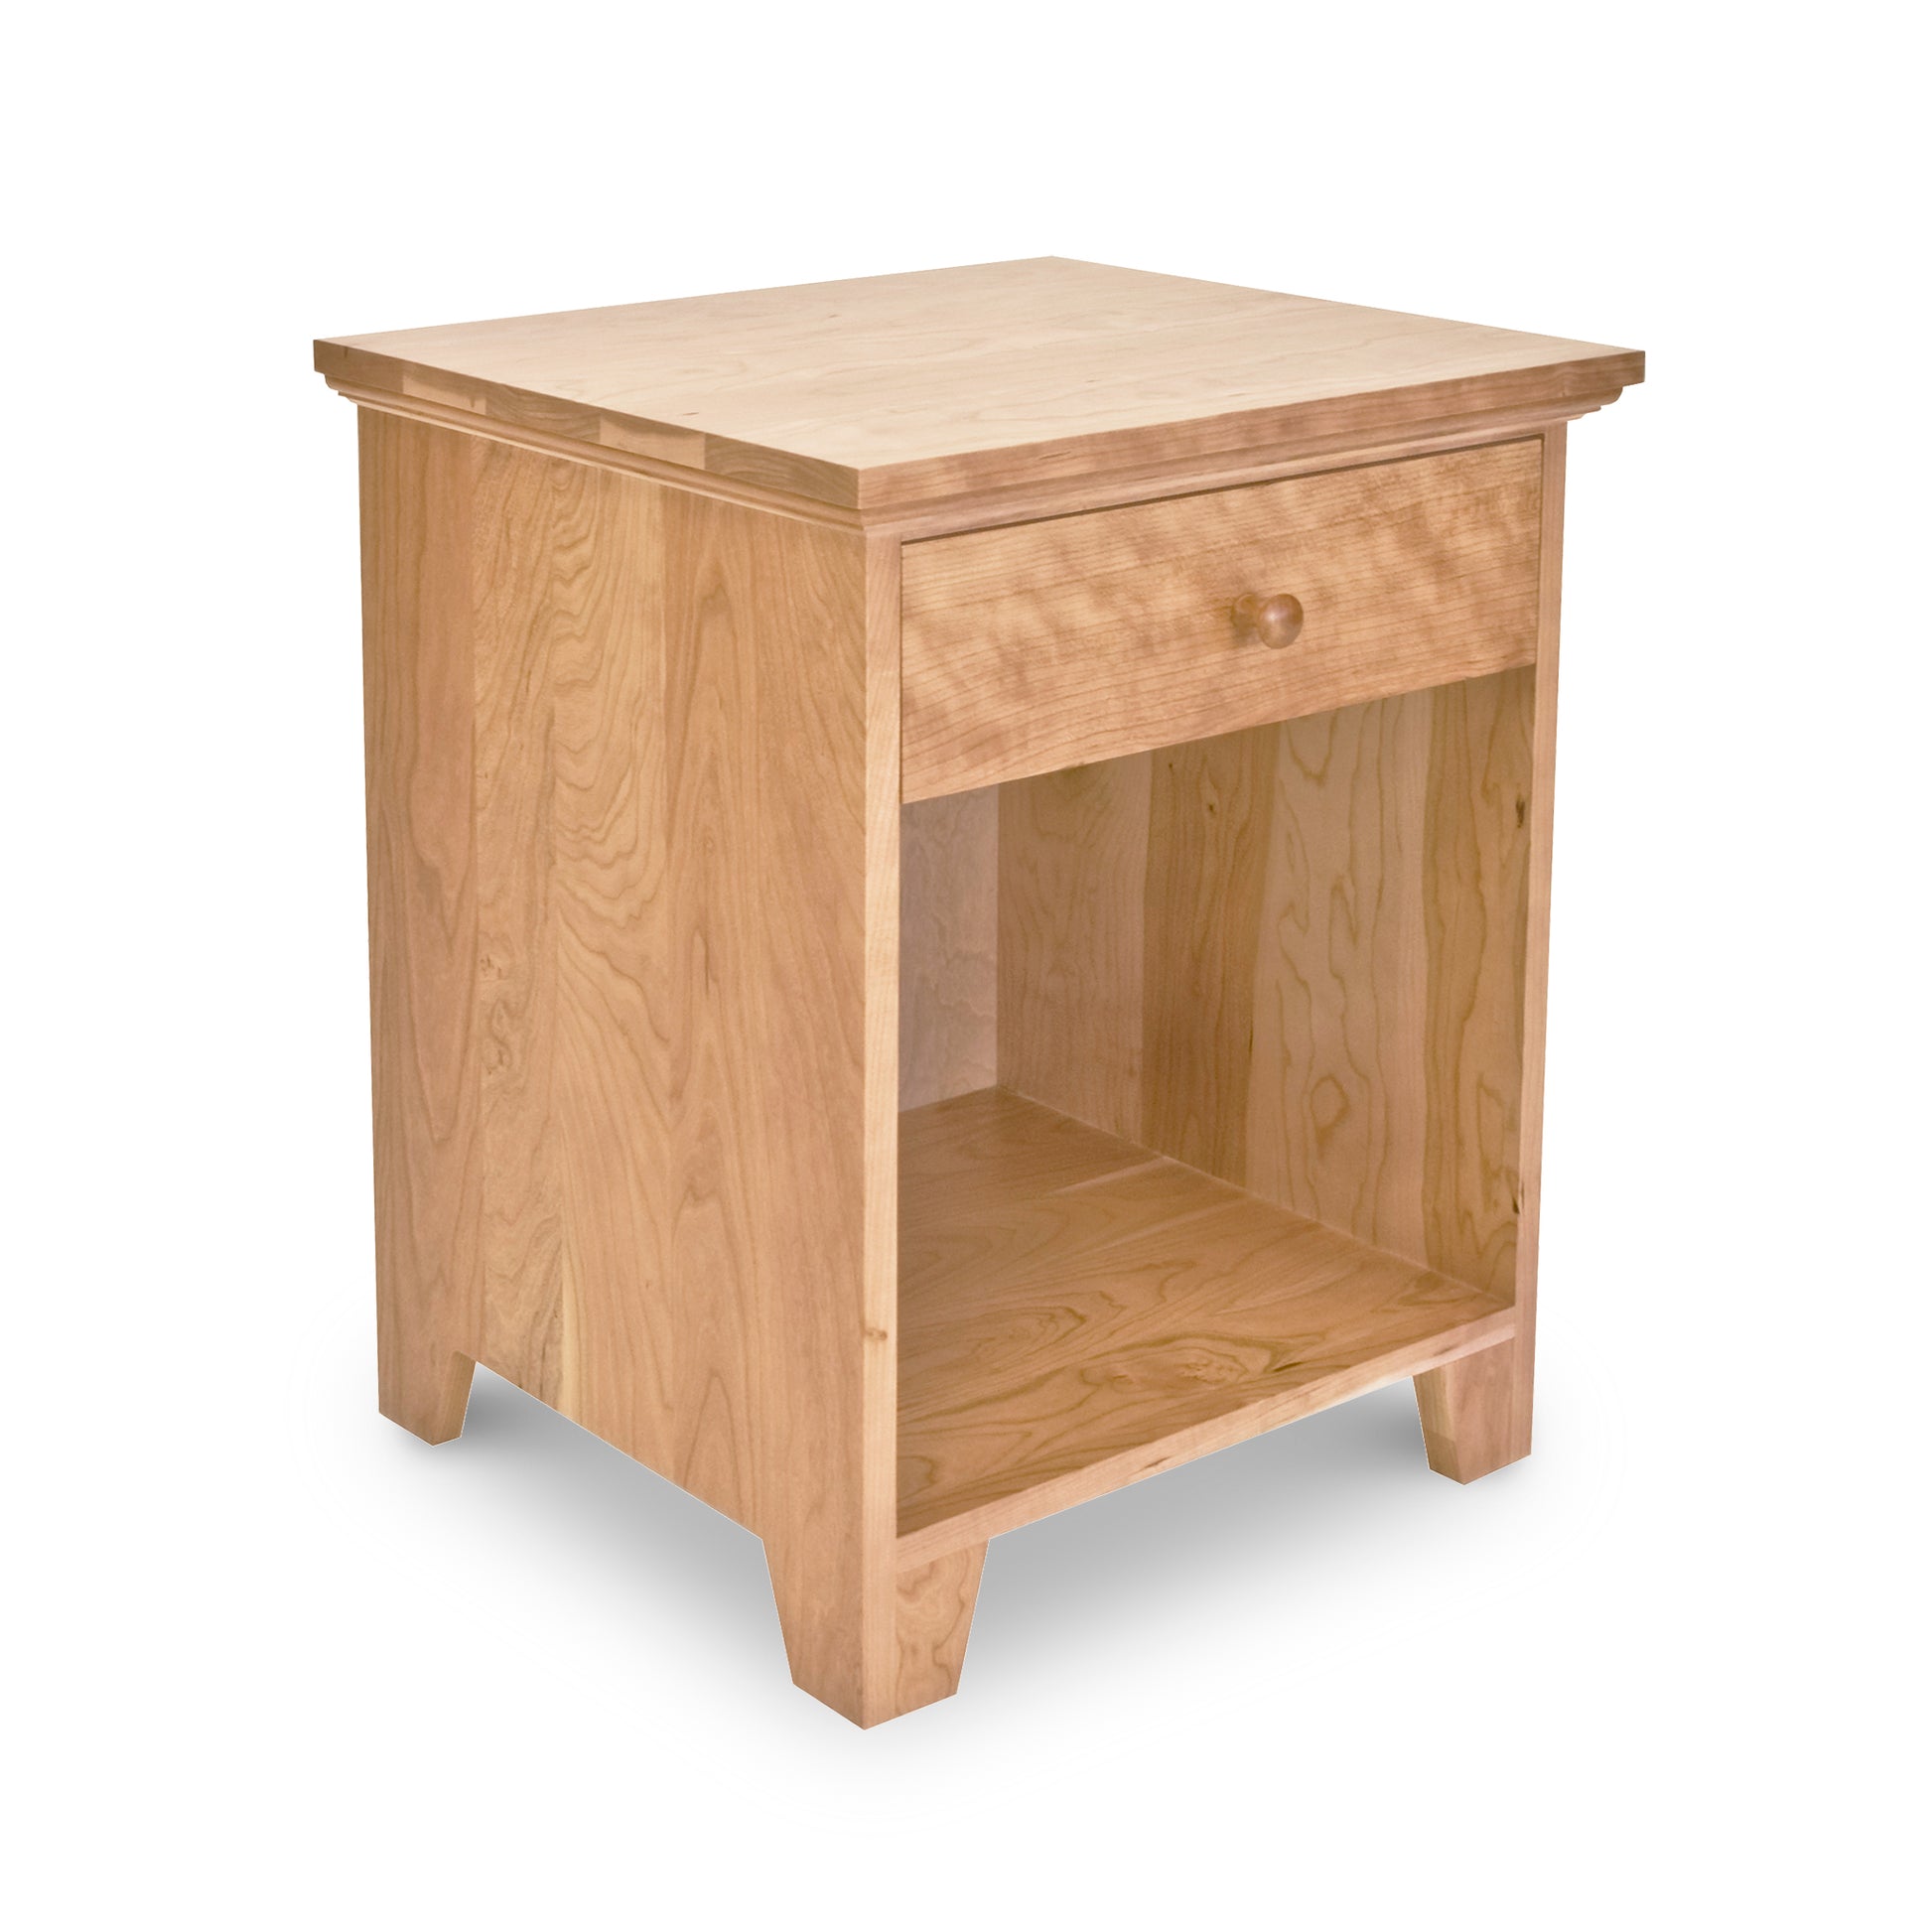 A Lyndon Furniture American Country 1-Drawer Enclosed Shelf Nightstand for the bedroom, featuring a single drawer.